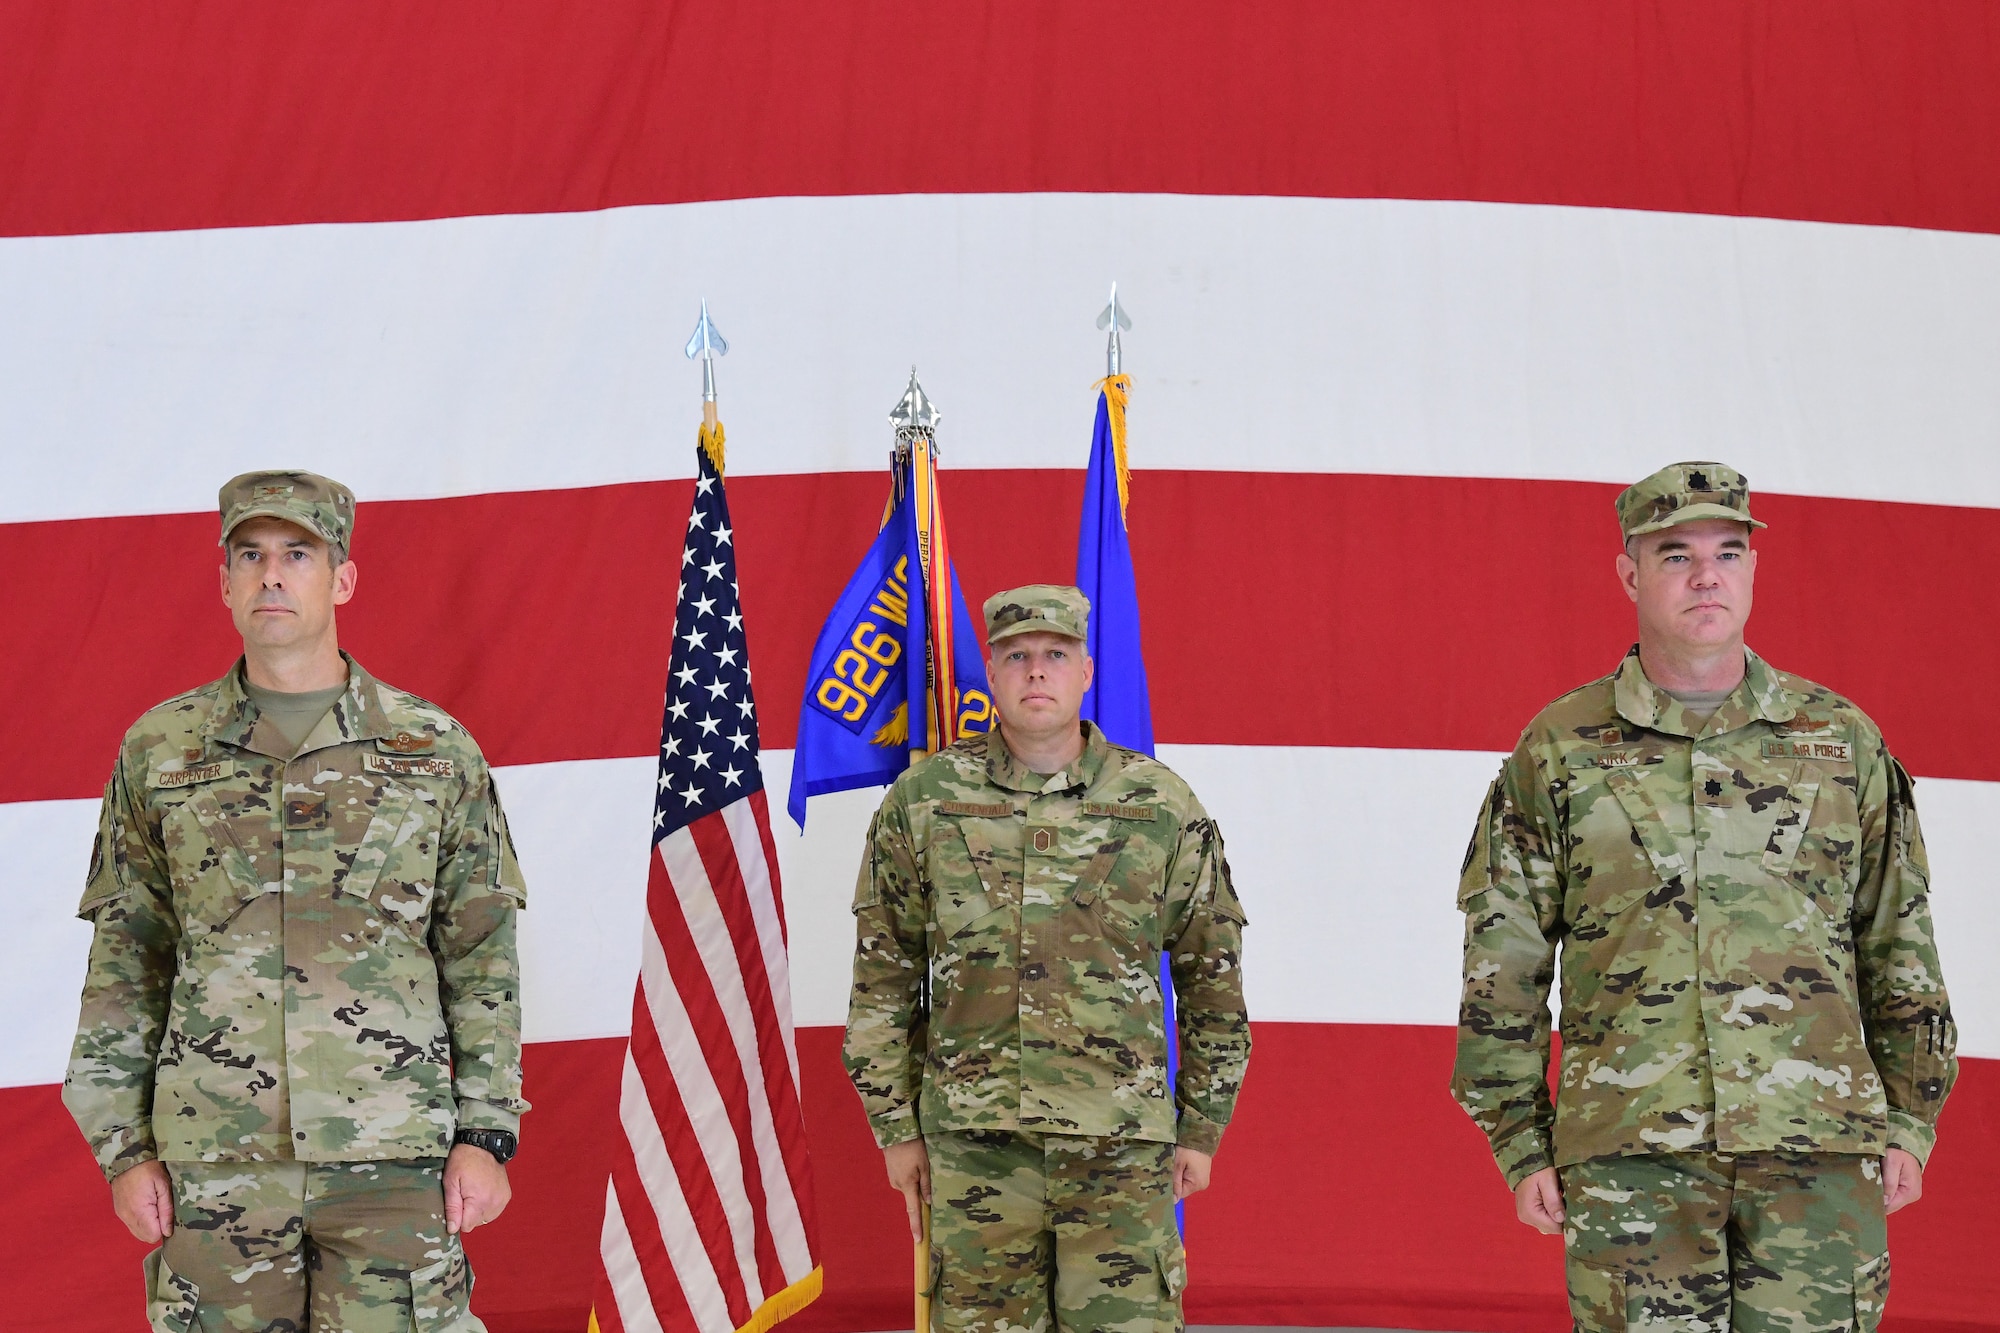 Lt. Col. Michael Kirk assumed command of the 926th Security Forces Squadron, during a modest Assumption of Command ceremony, June 24, 2020, at Nellis Air Force Base, Nevada.